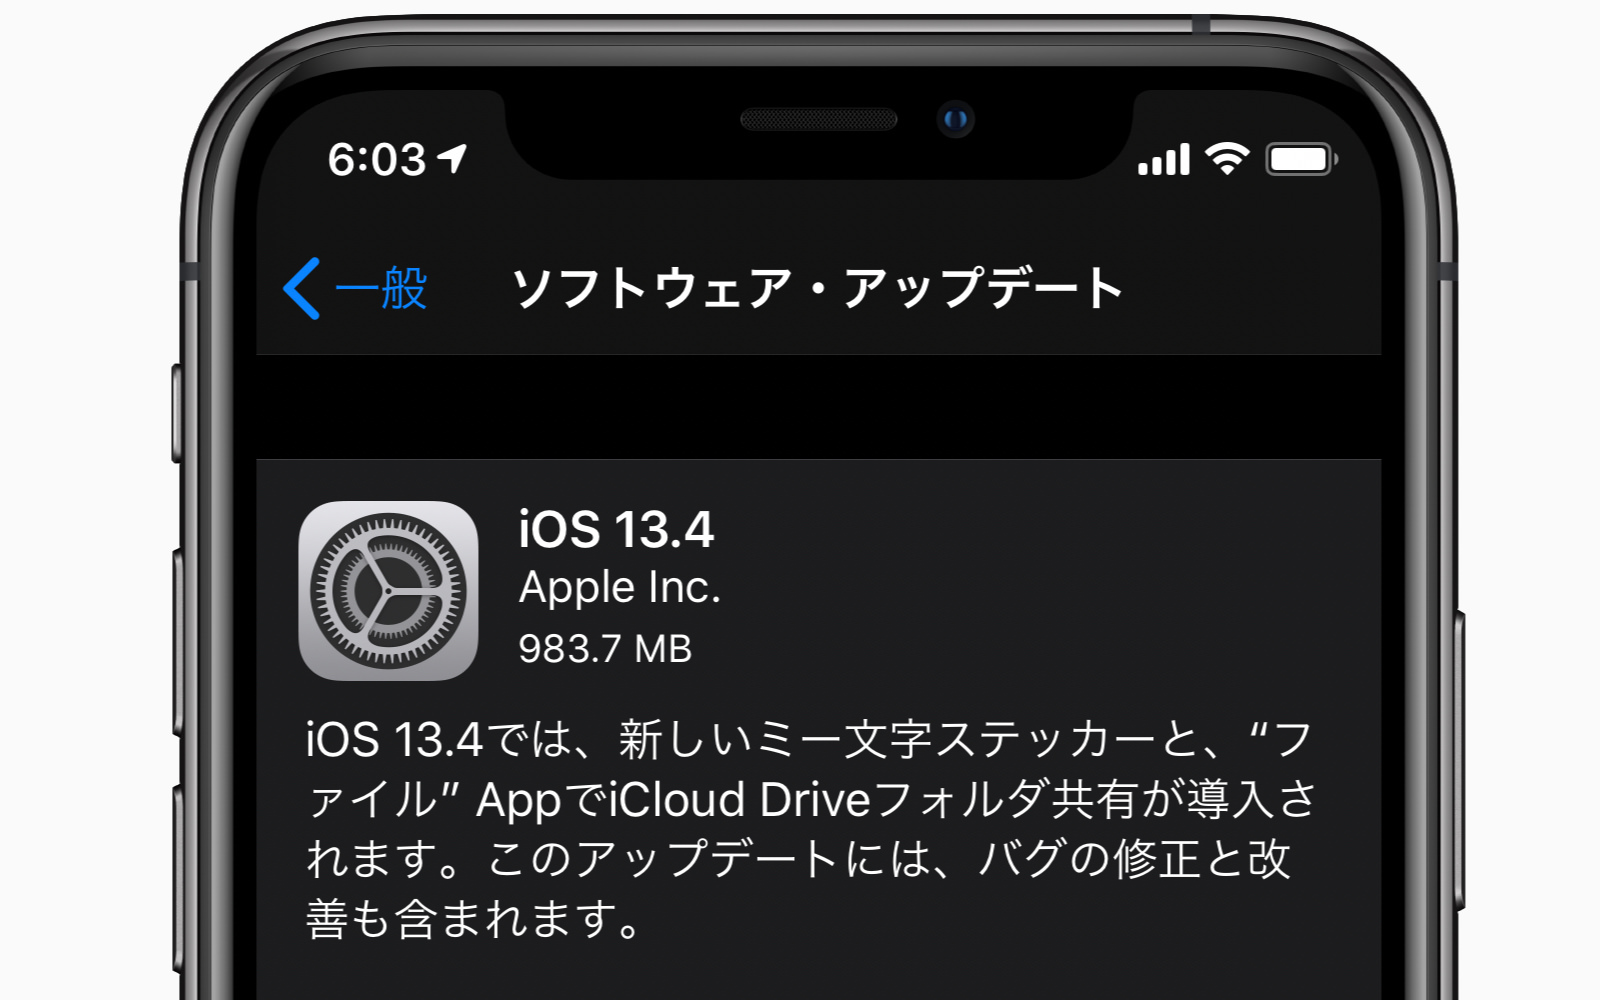 IOS13 4 official release